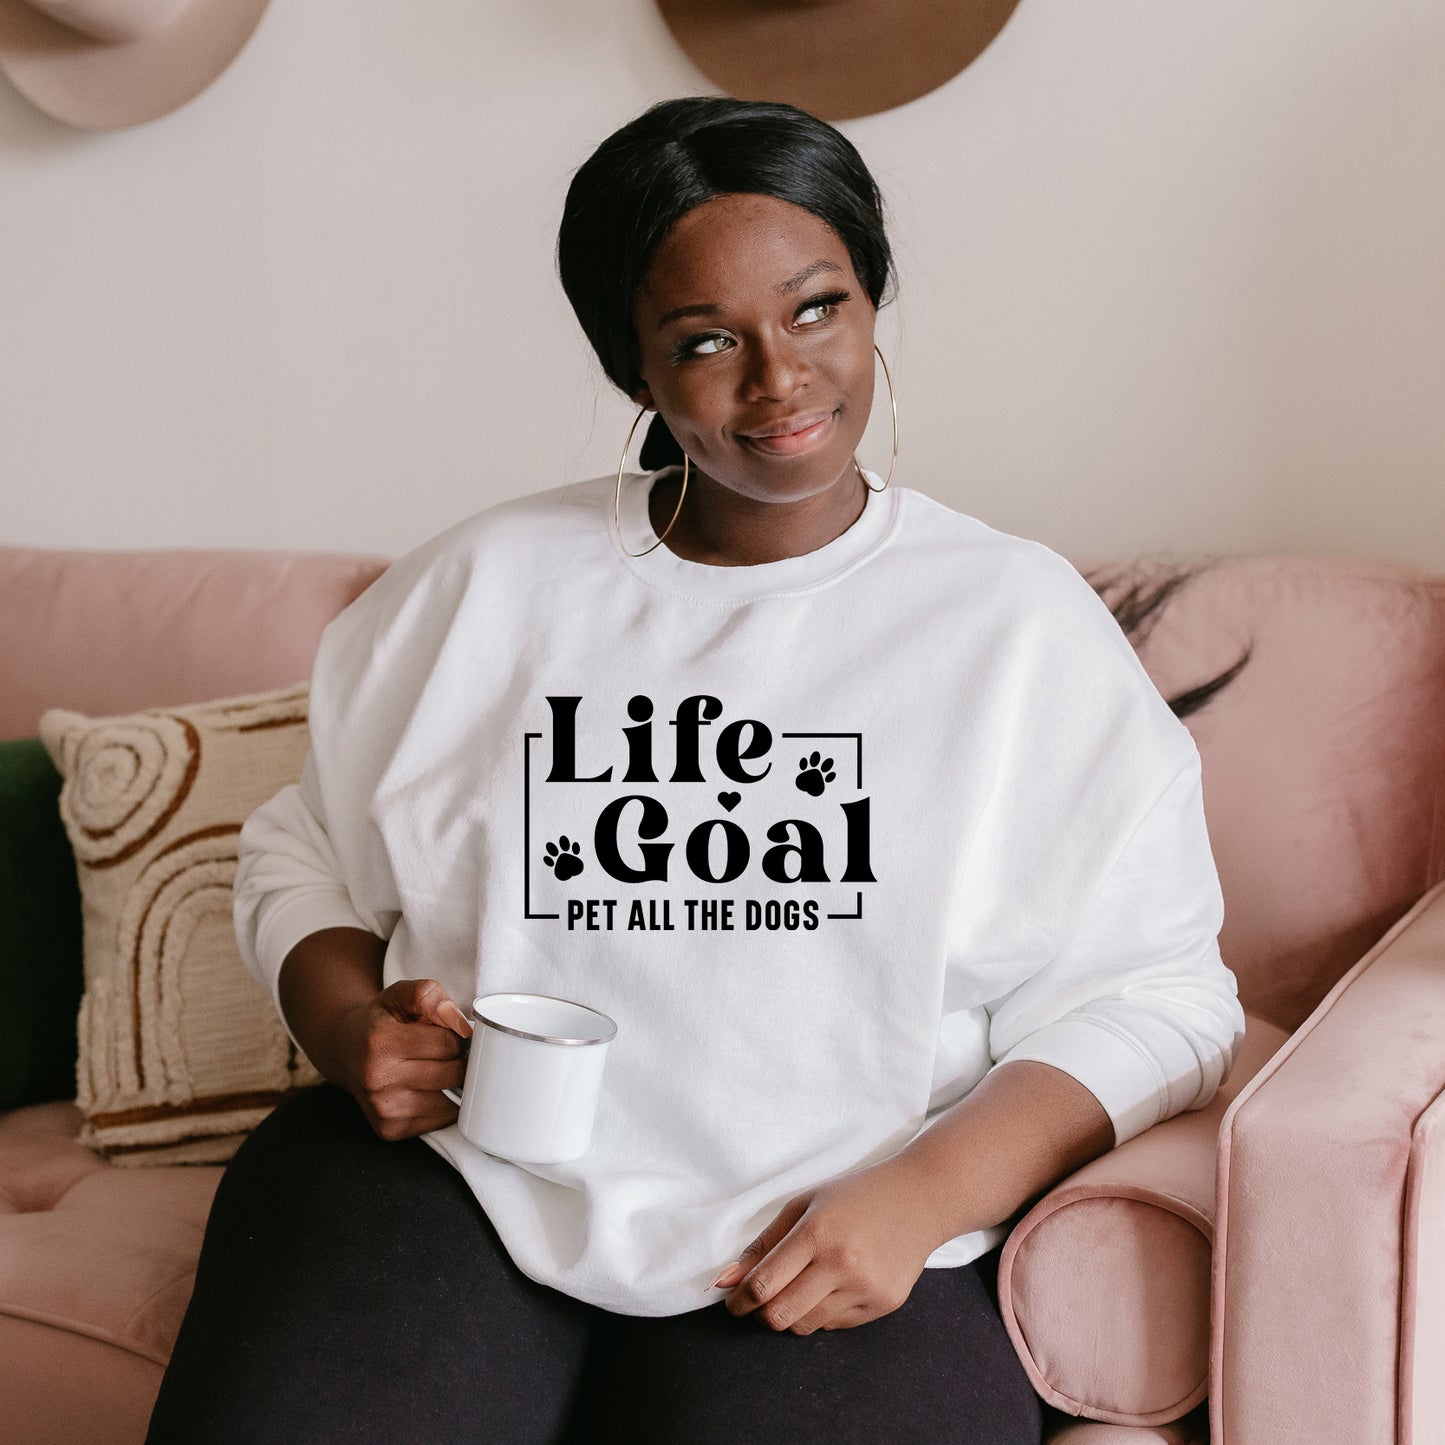 Life Goal Pet All The Dogs | Plus Size Sweatshirt